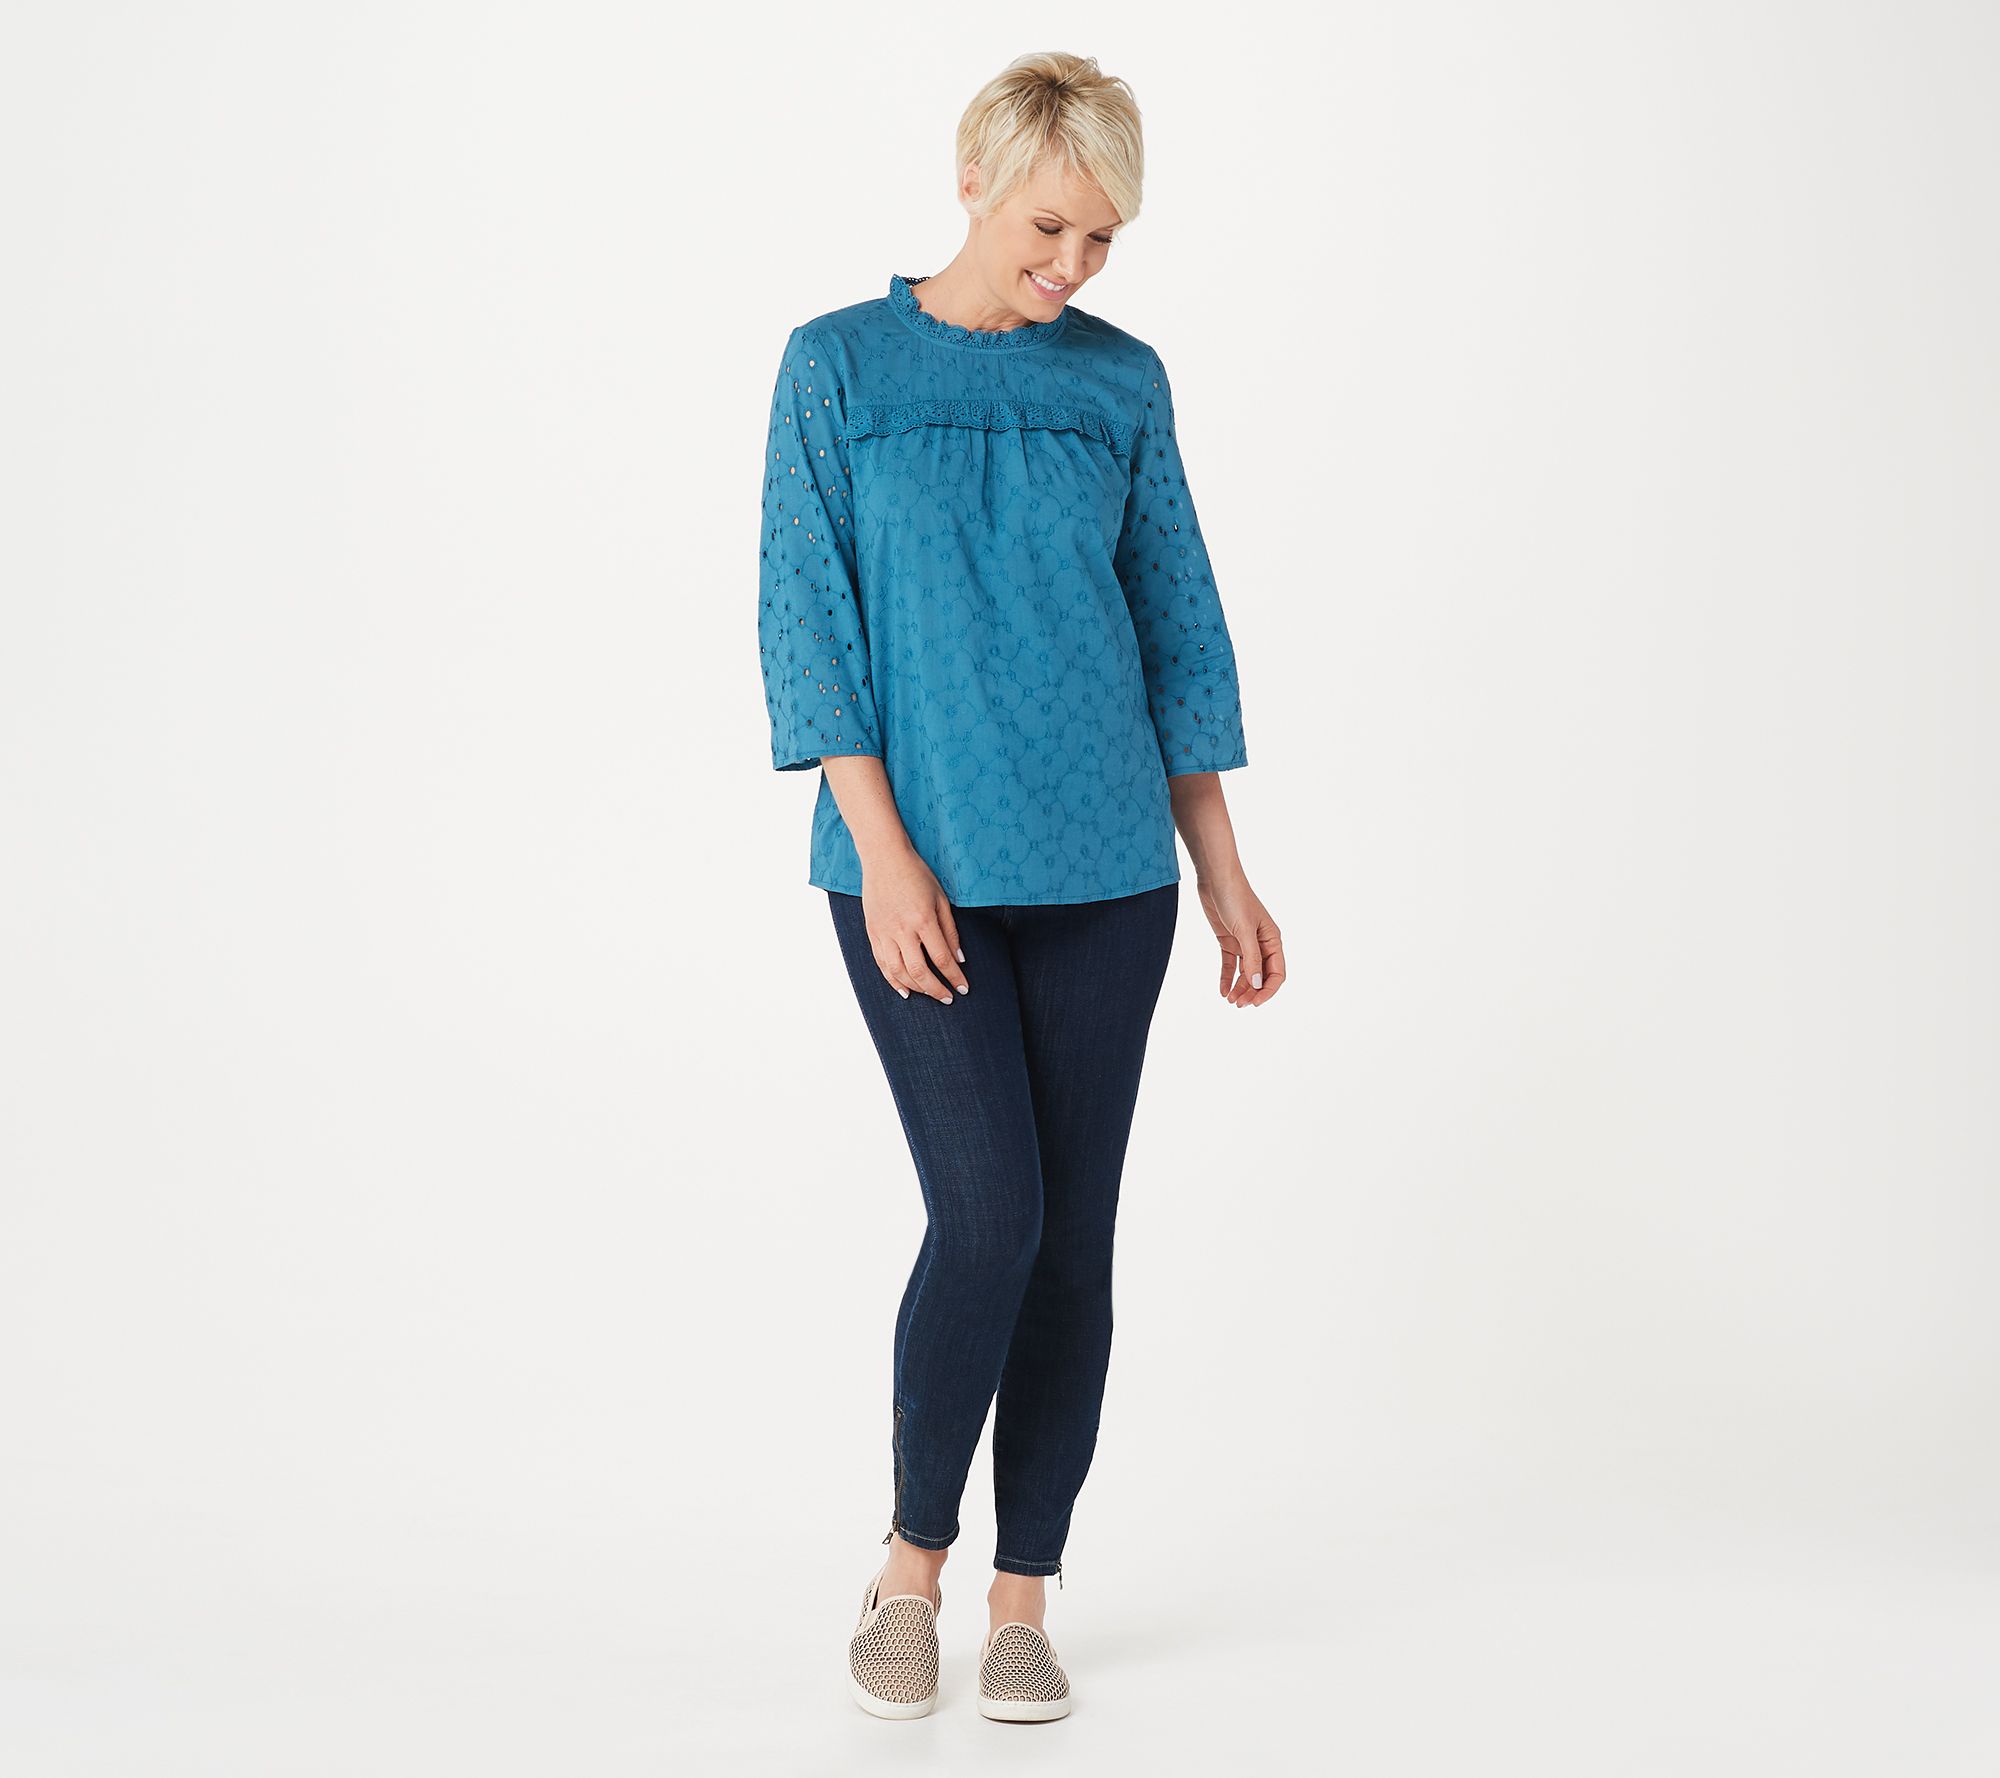 LOGO by Lori Goldstein Eyelet Woven Blouse with Ruffle Detail - QVC.com